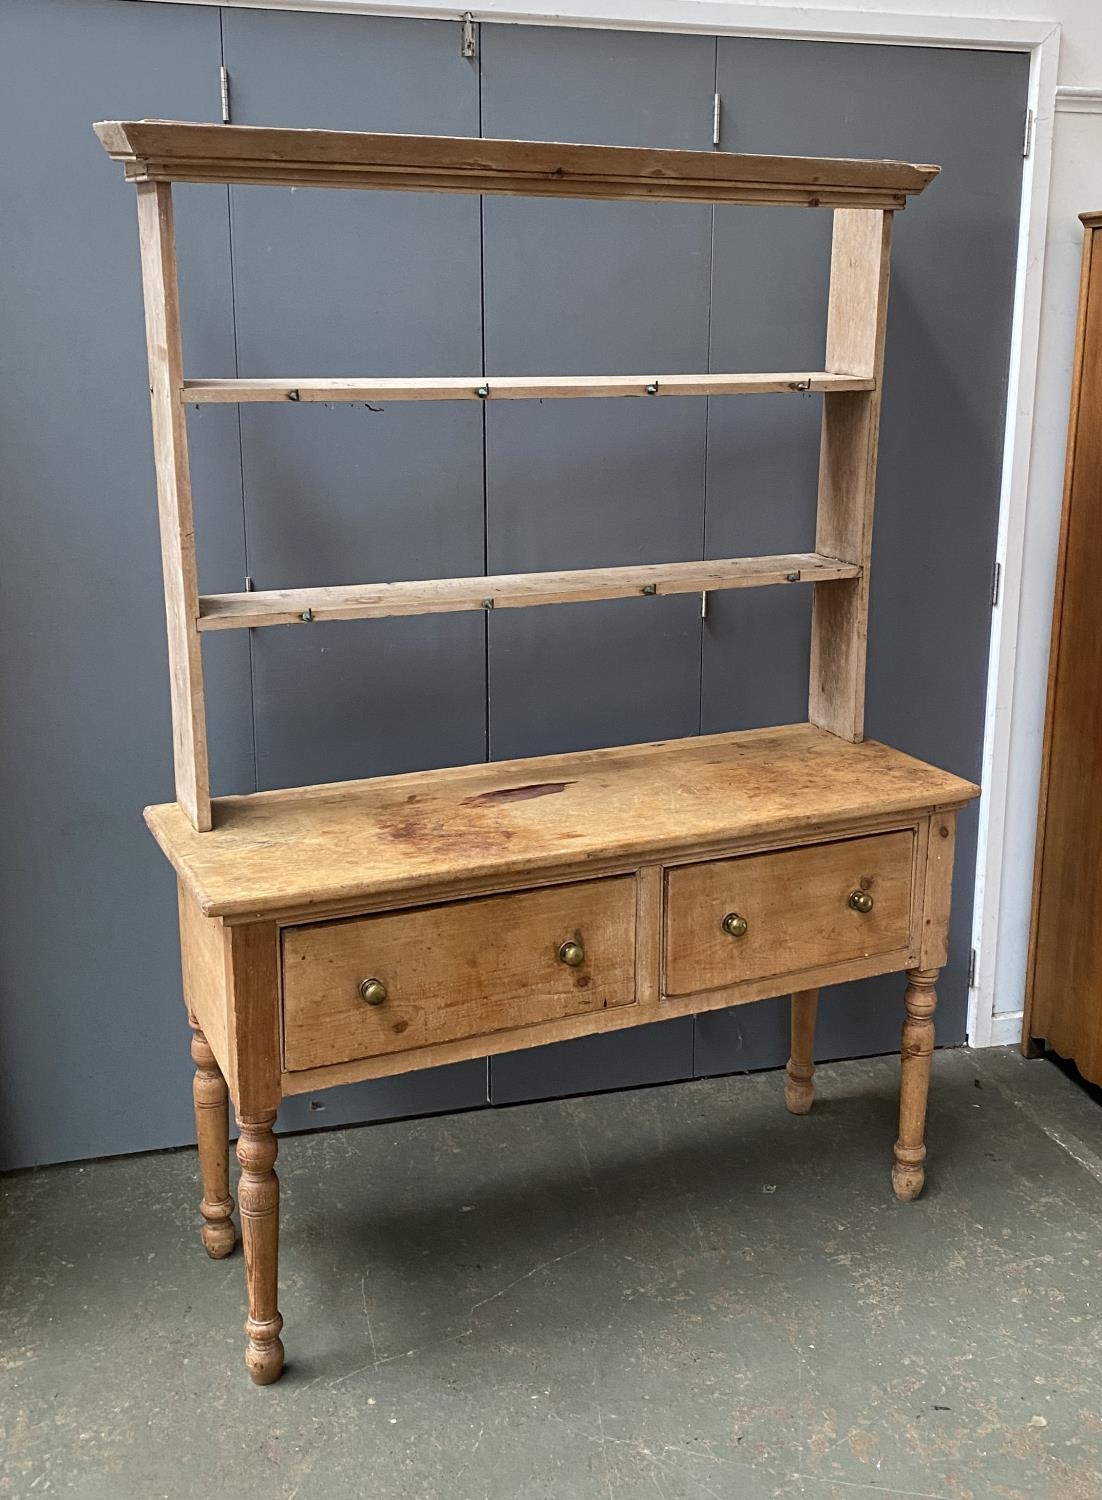 A 19th century pine kitchen dresser, the rack with two shelves, over a base of two drawers, on